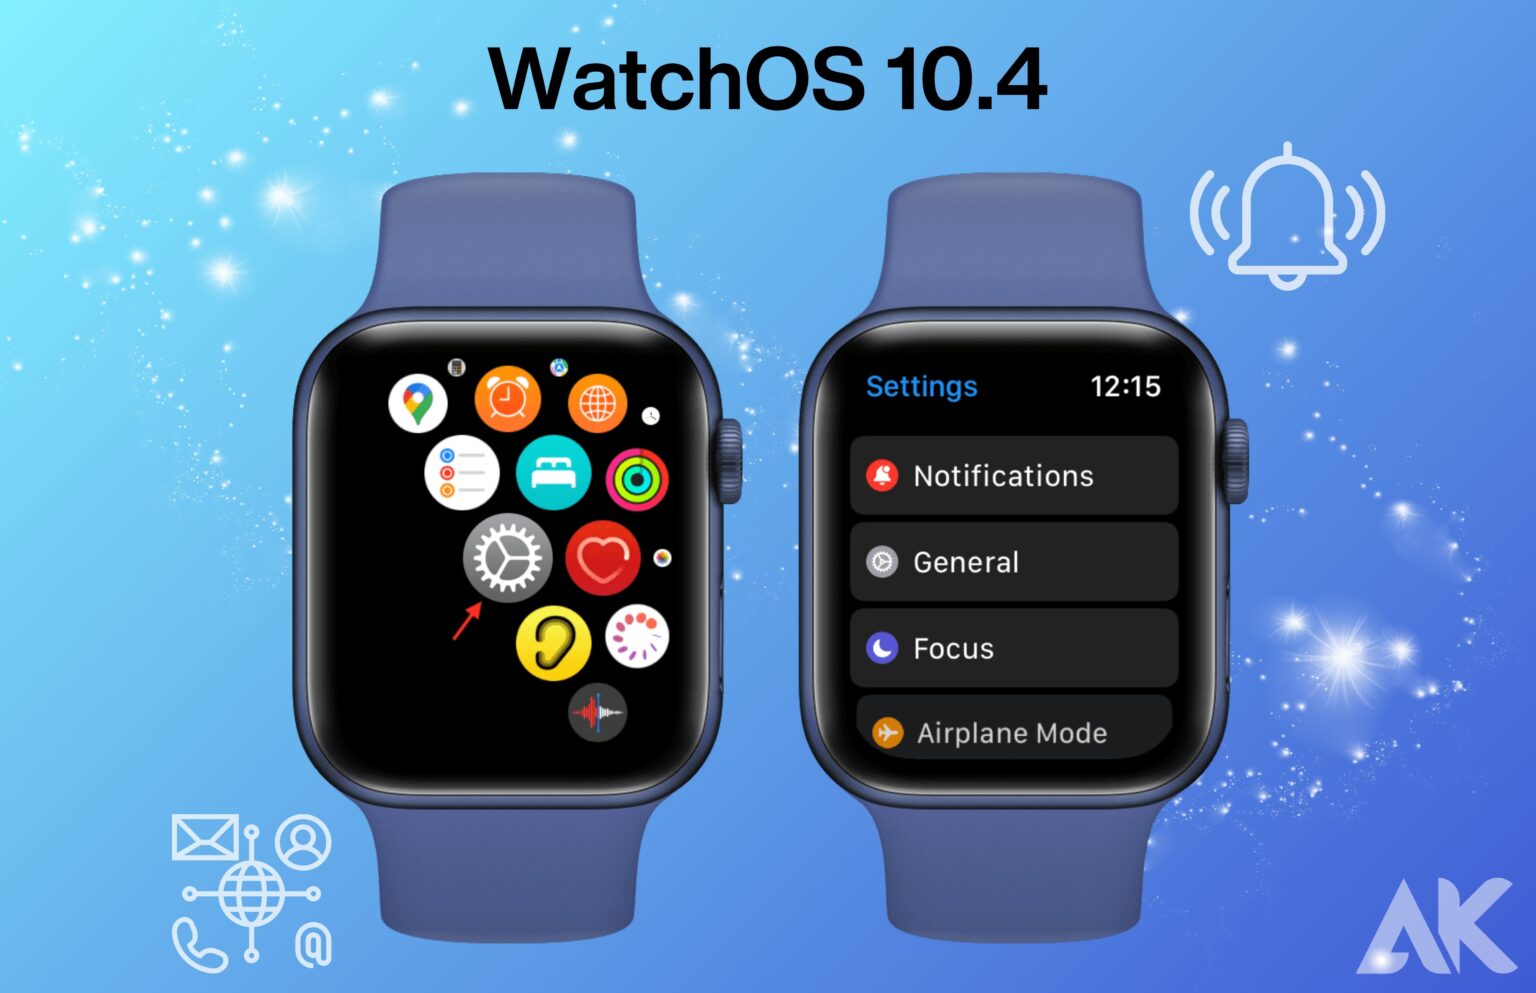 Stay Informed on Your Wrist A Look at watchOS 10.4 Notifications